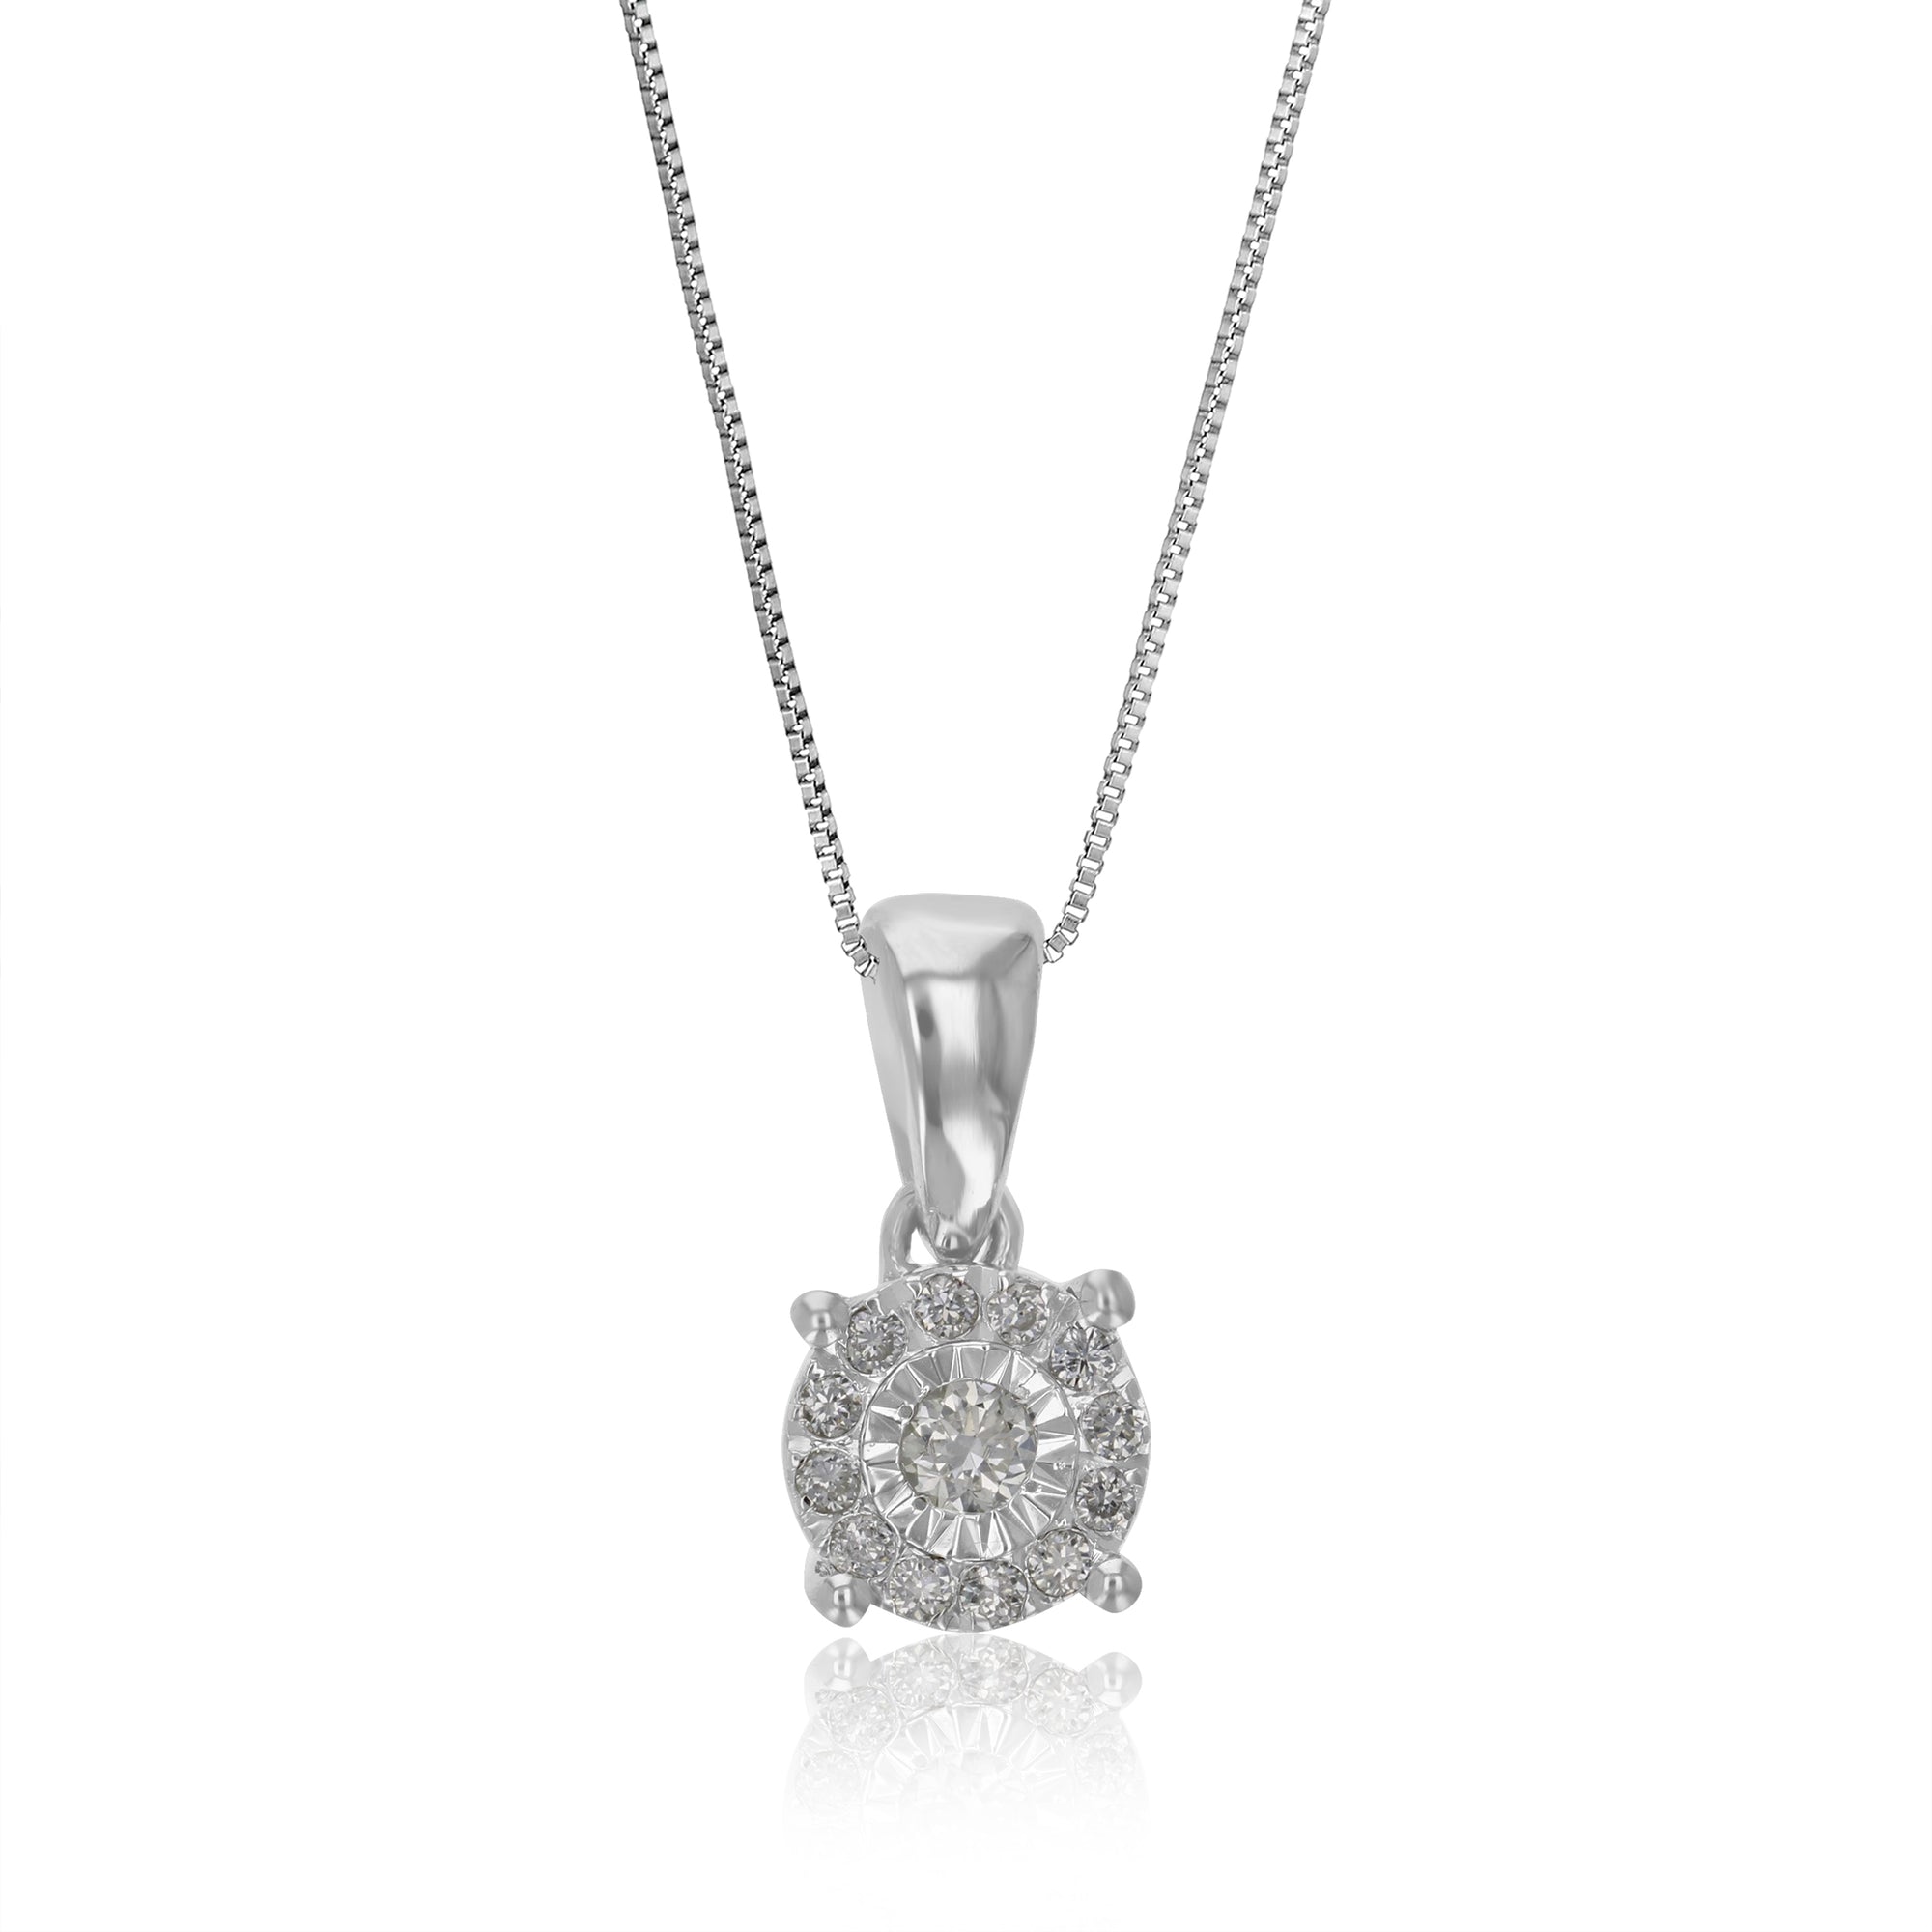 1/10 cttw Diamond Pendant Necklace for Women, Lab Grown Diamond Round Pendant Necklace in .925 Sterling Silver with Chain, Size 1/2 Inch